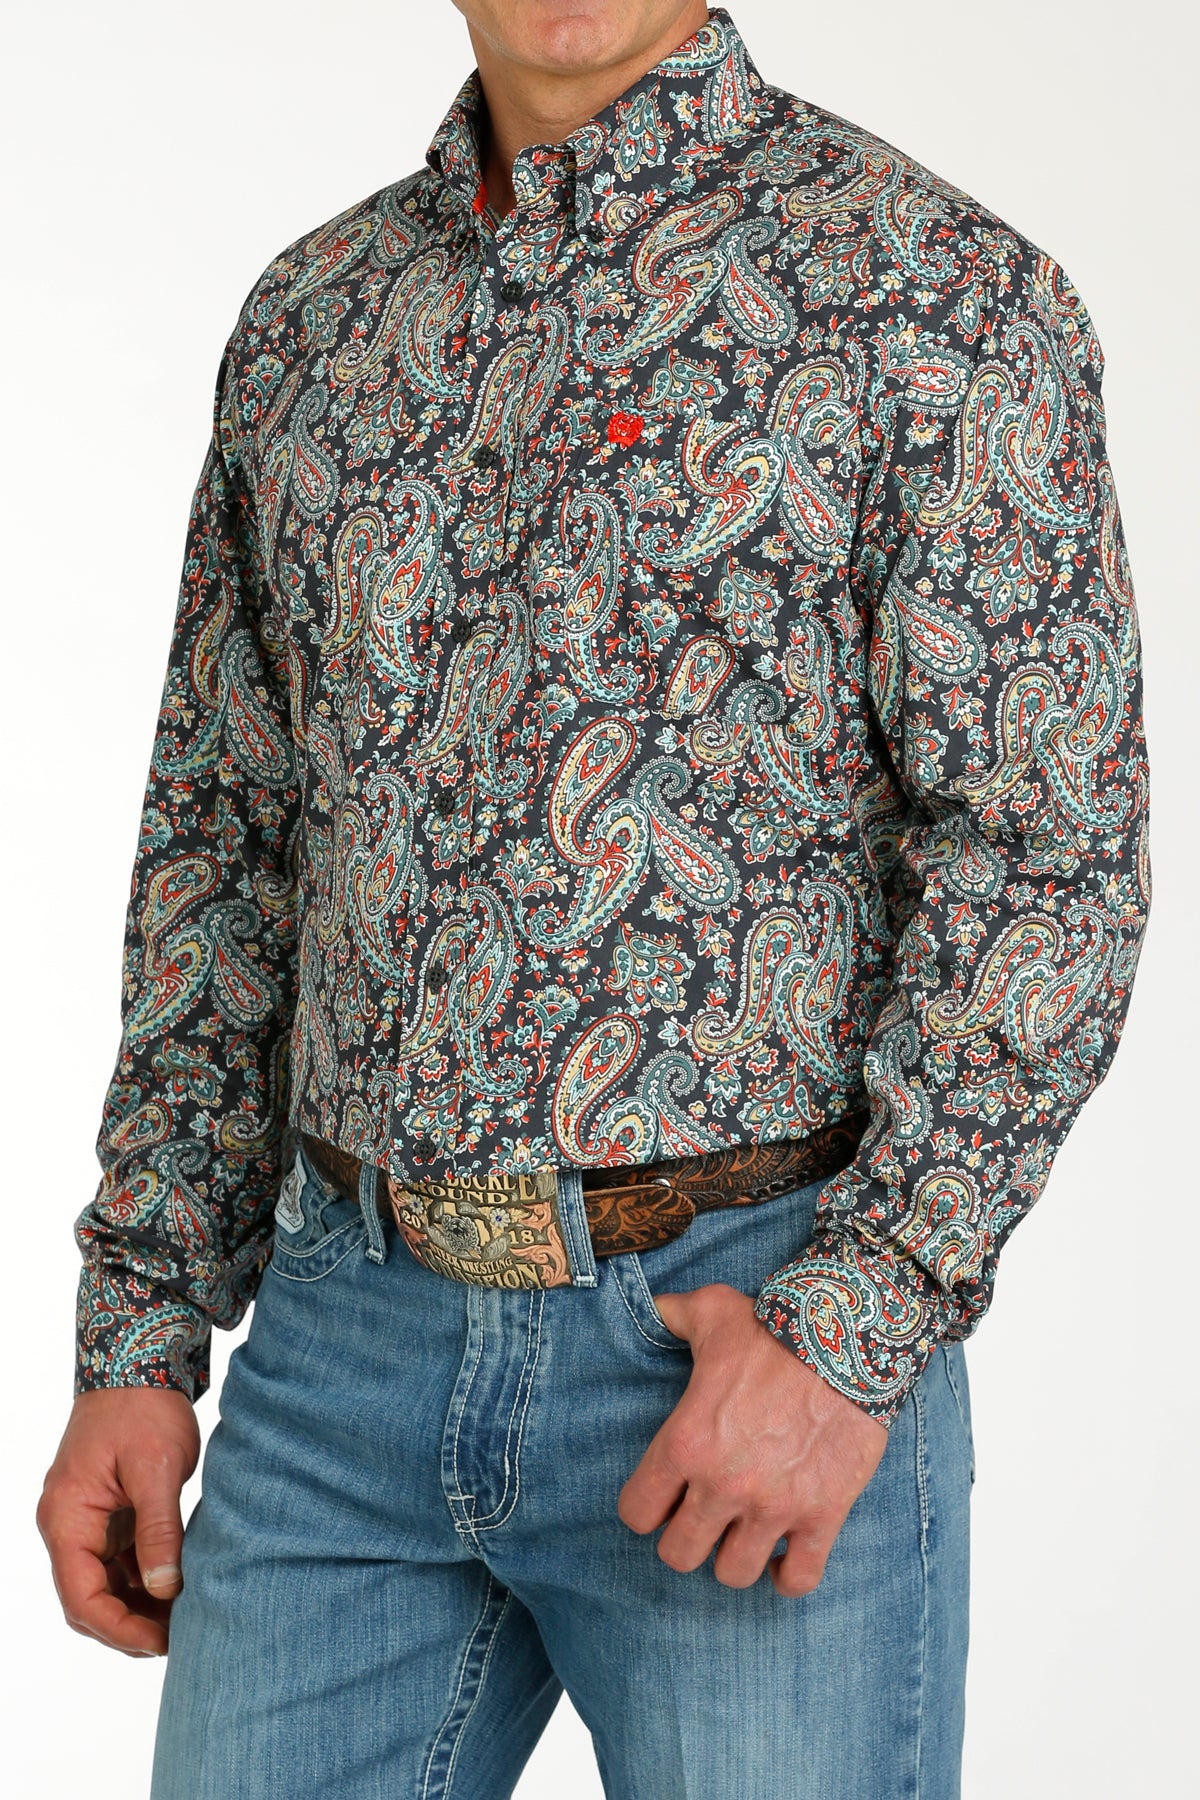 Paisley Button Down- charcoal, red, & turquoise